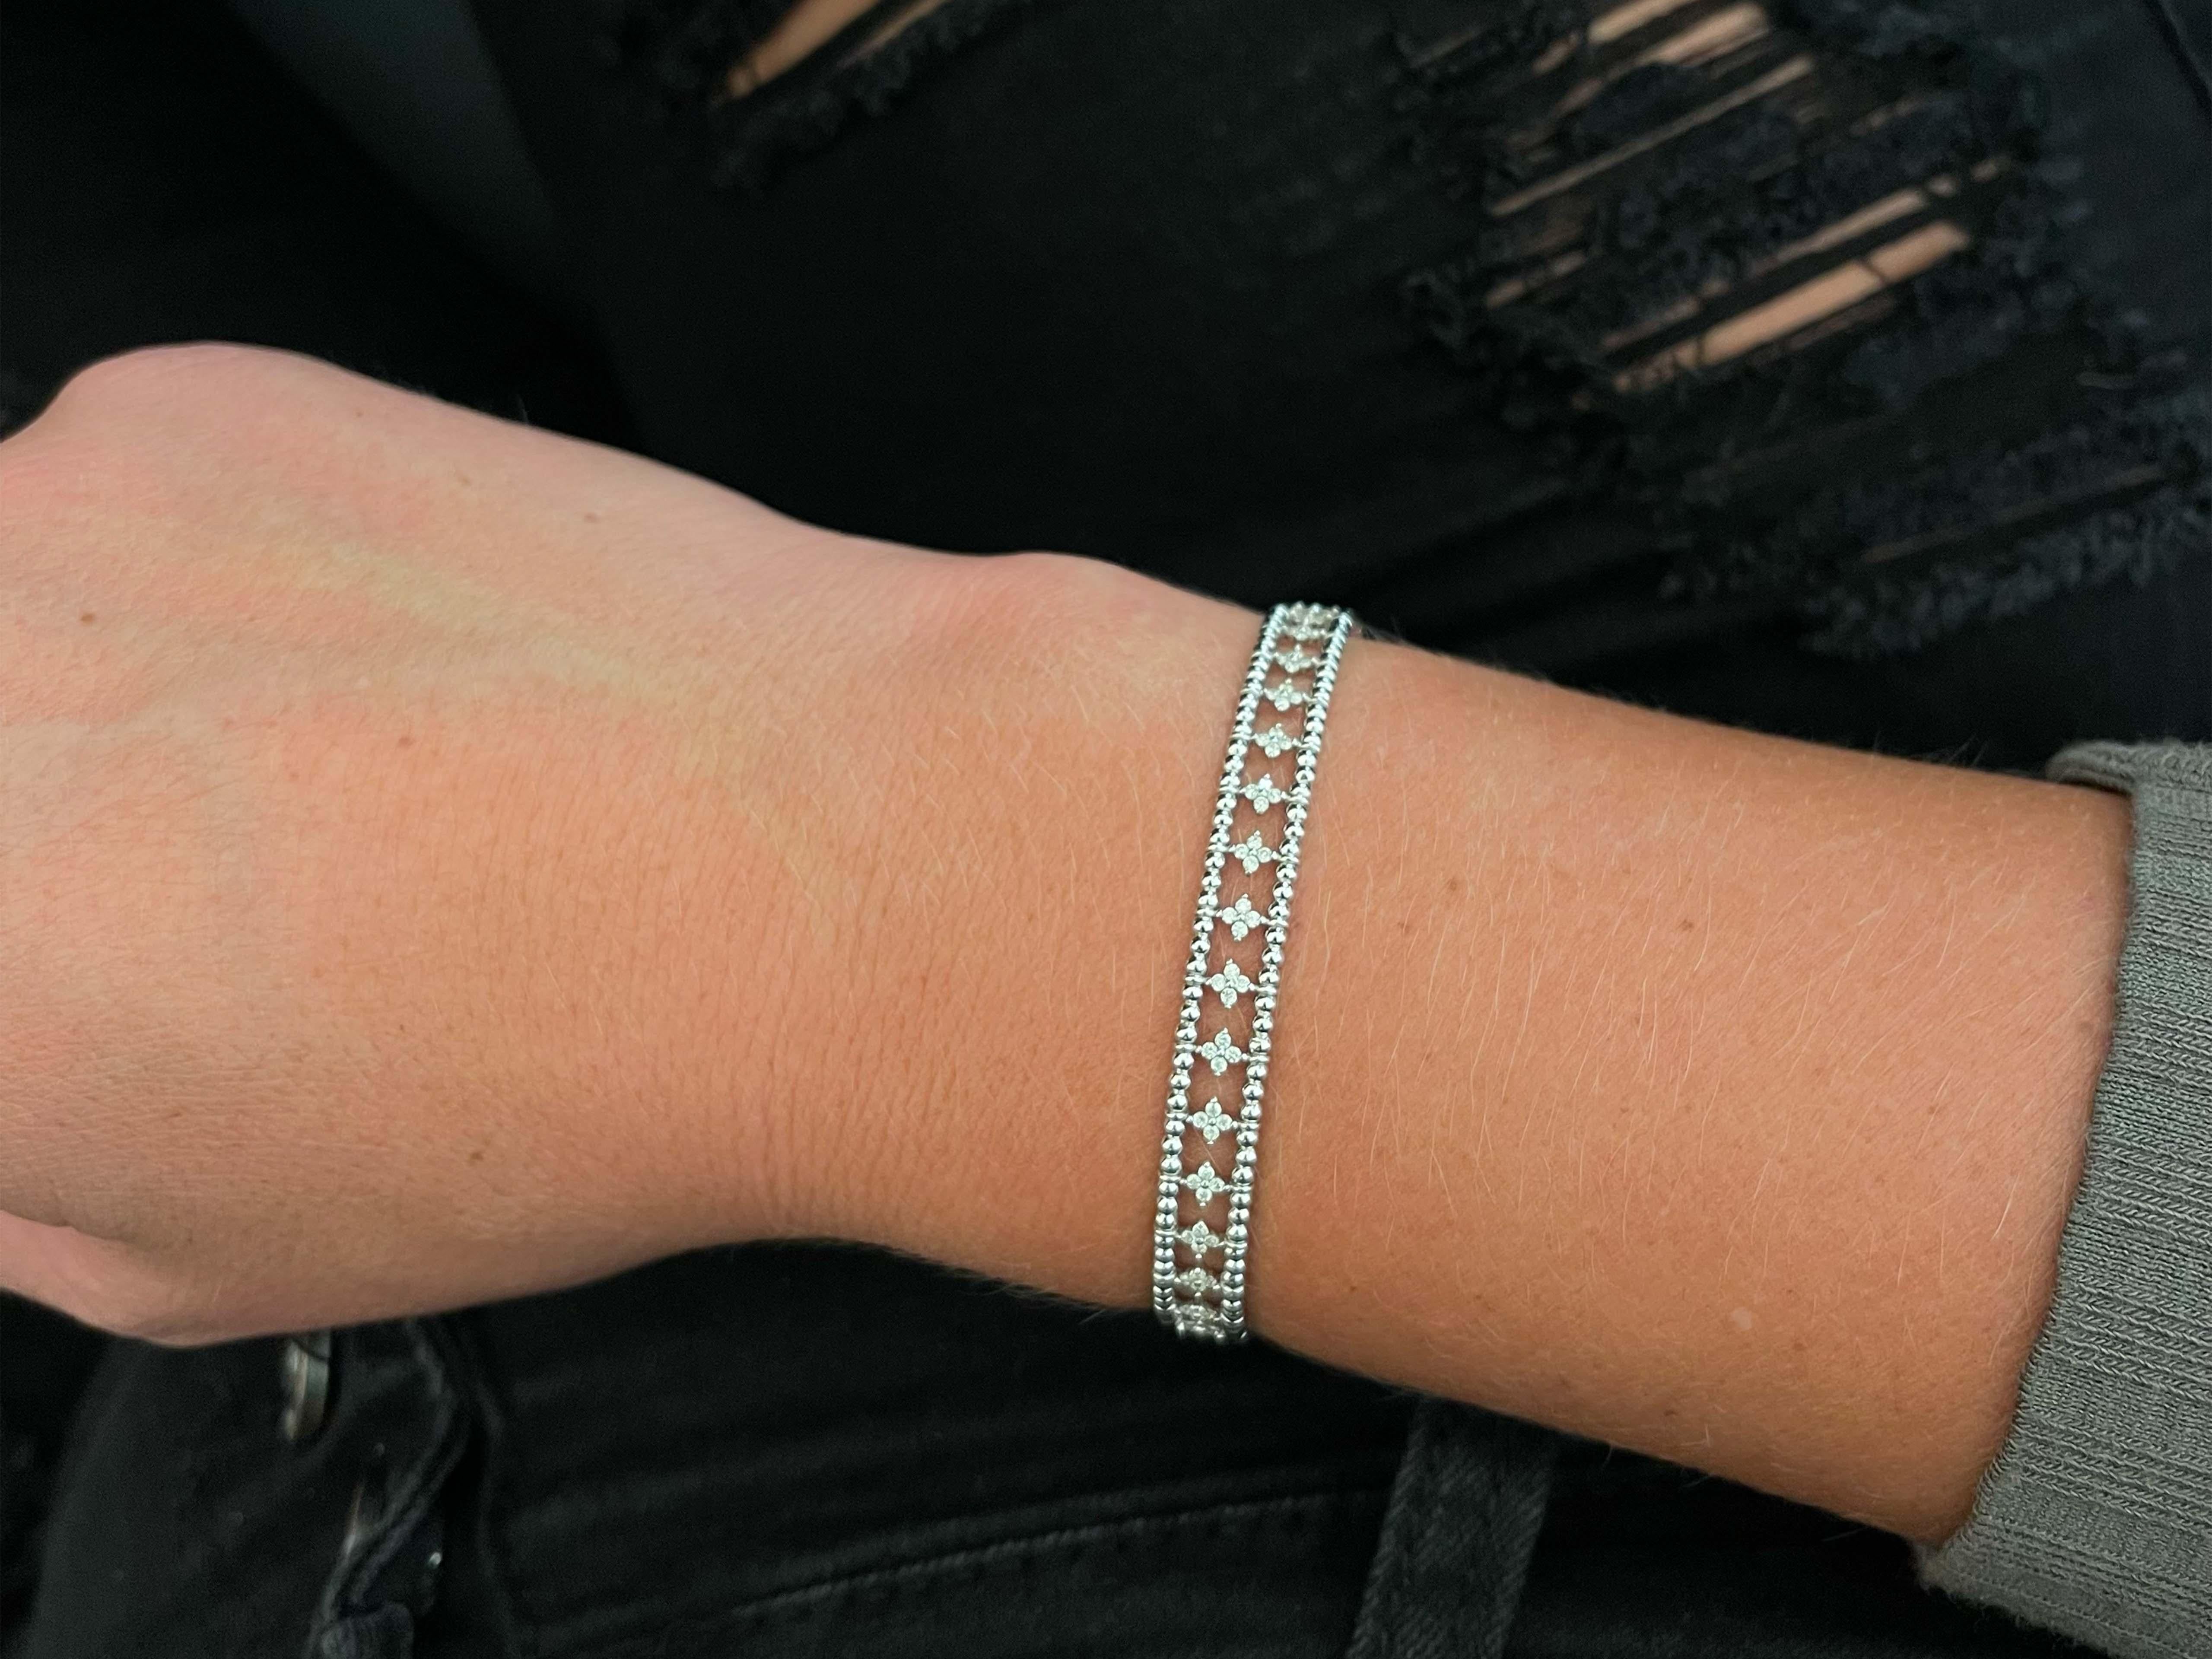 This beautiful flexible bracelet features numerous diamonds in flower shapes weighing a total of ~0.70 carats. The diamonds are G-H in color and VS in clarity. The bracelet is equipped with a slide latch clasp. The inside diameter measures 57 mm by